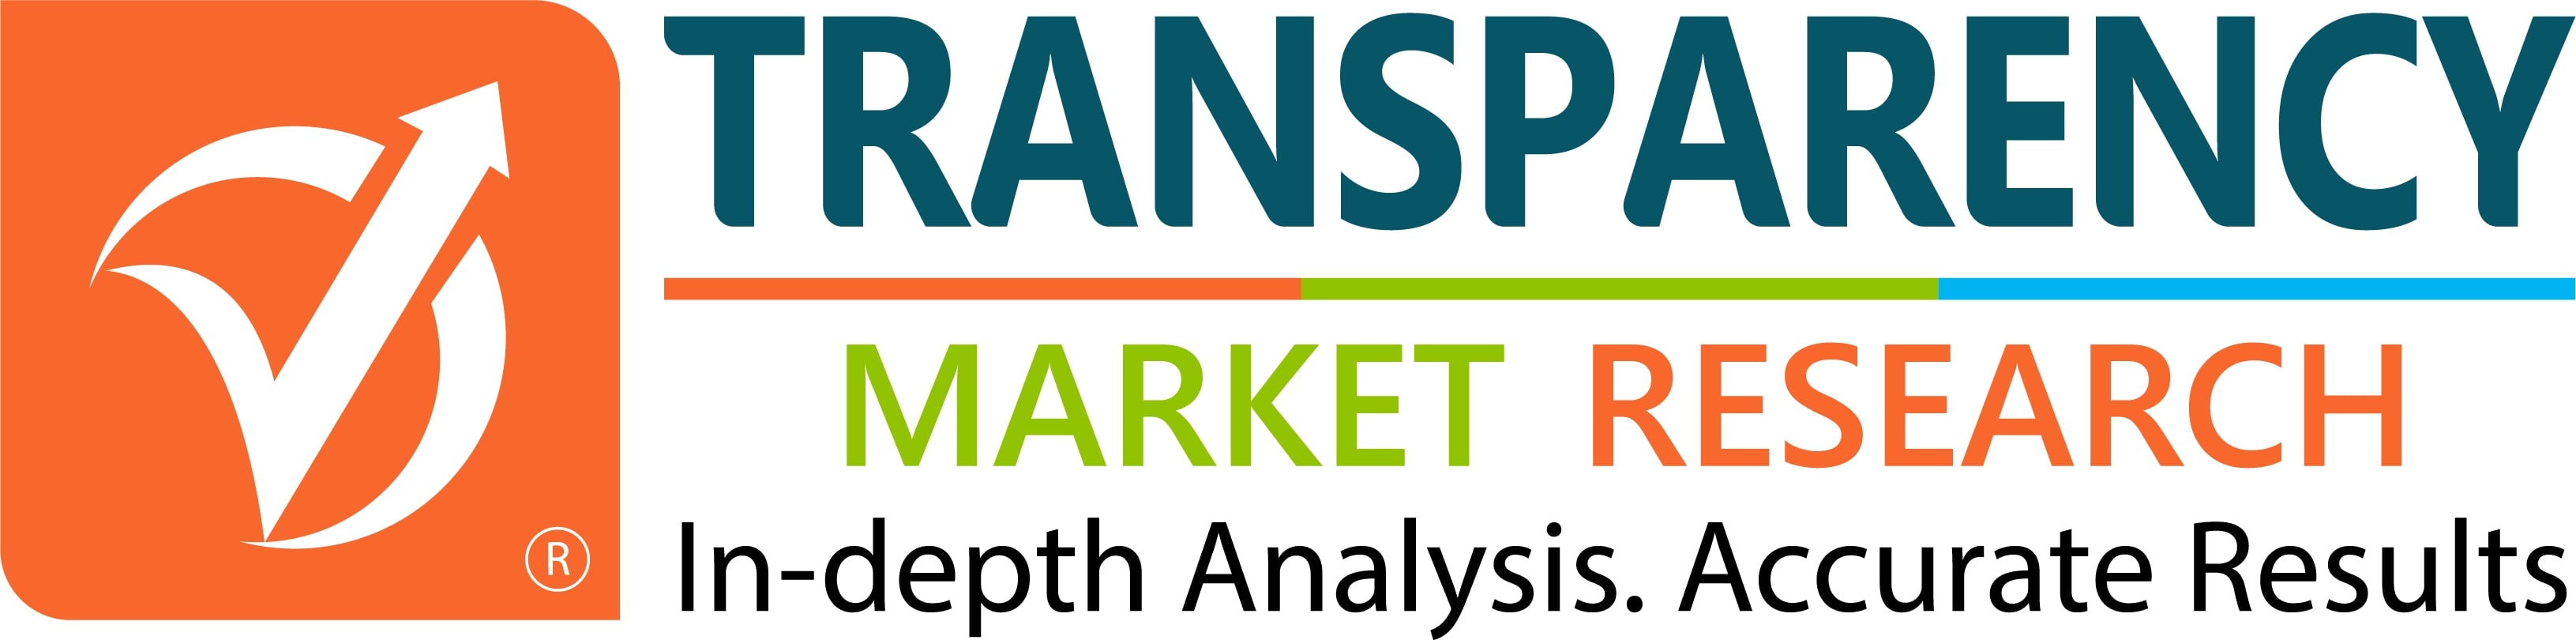 Heparin Market Research By Growth, Competitive Methods And Forecast To 2027